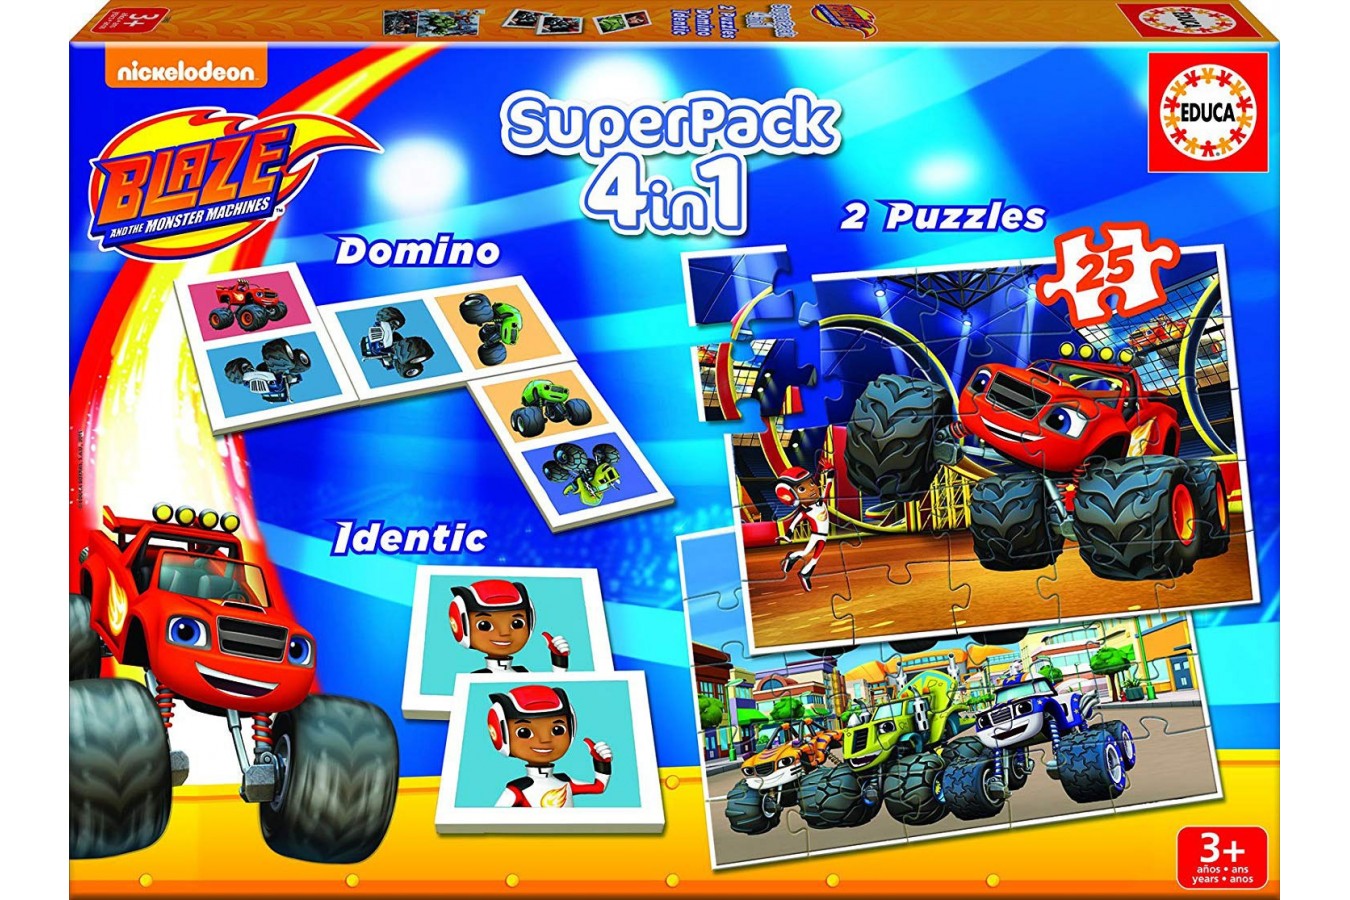 Puzzle Educa - Blaze and The Monster Machines, 2x25 piese (16853)